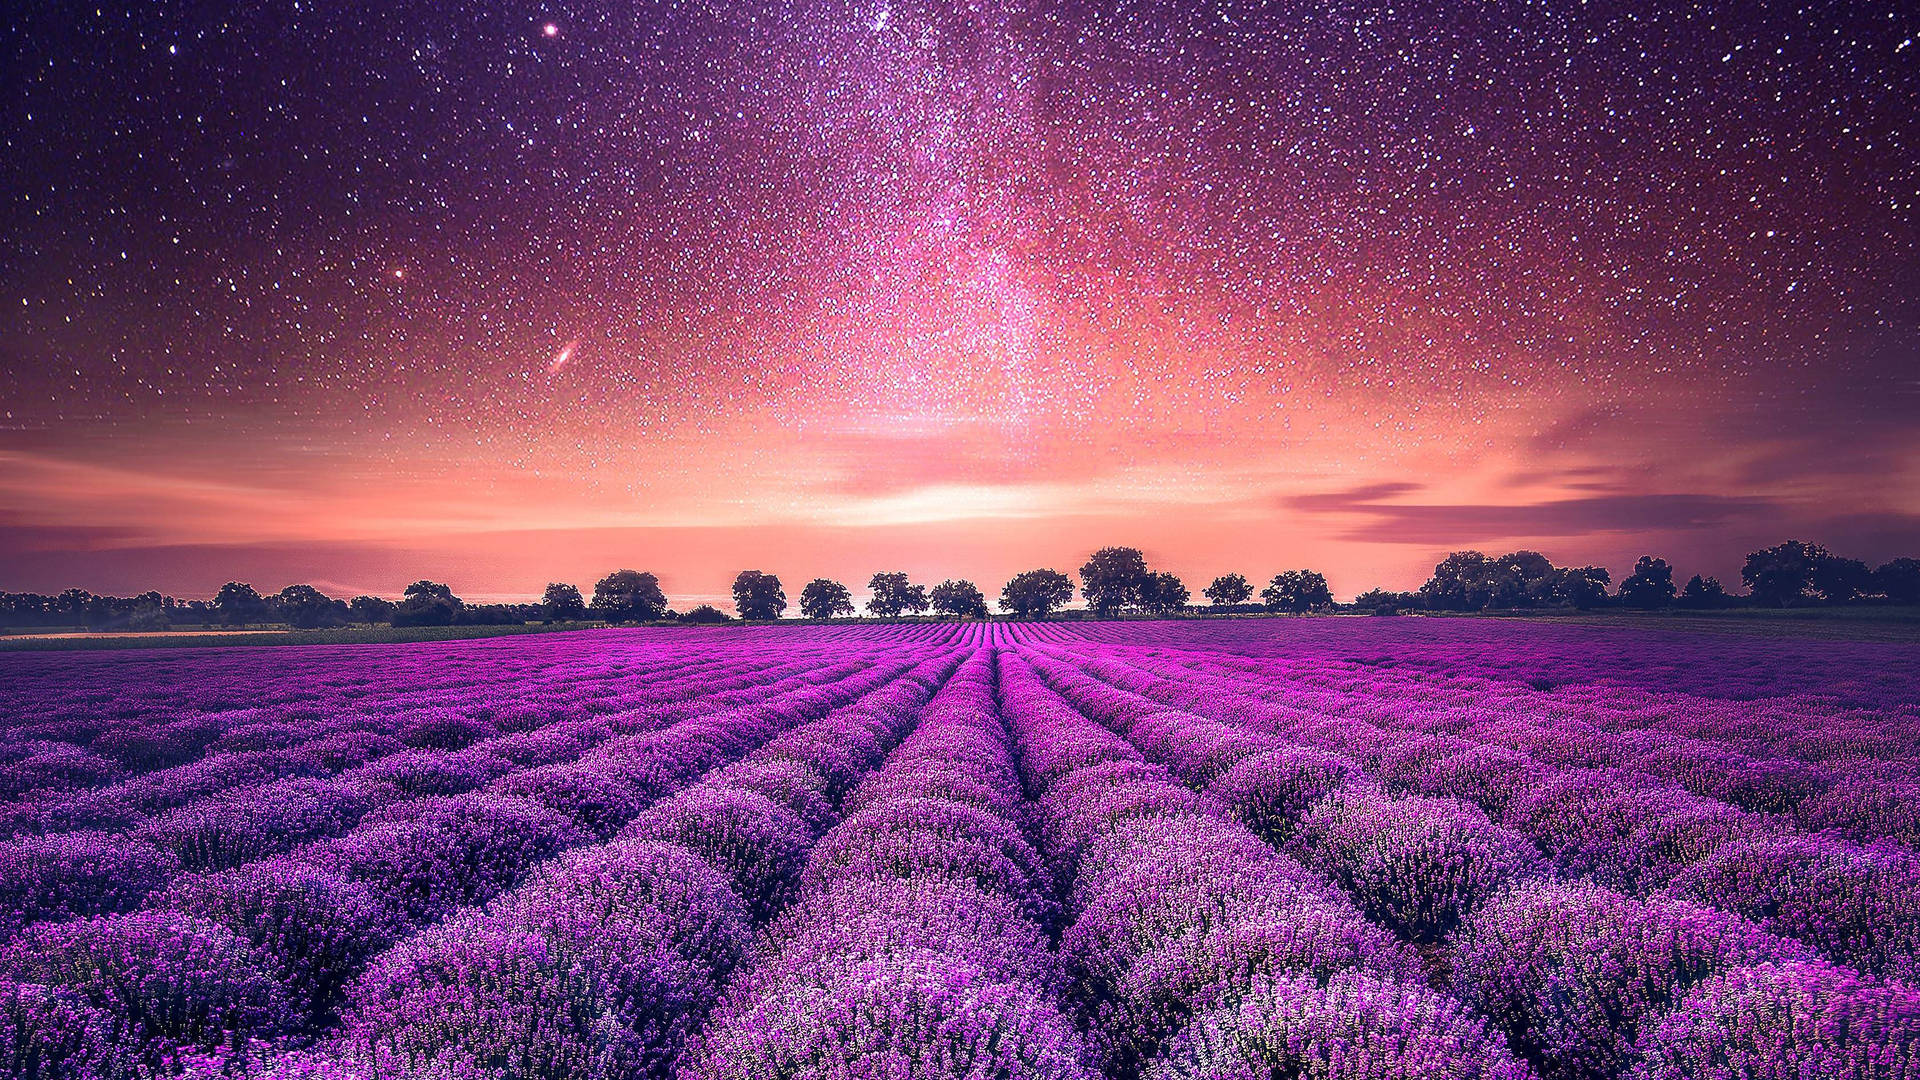 A breathtaking view of a lavender field at dusk Wallpaper